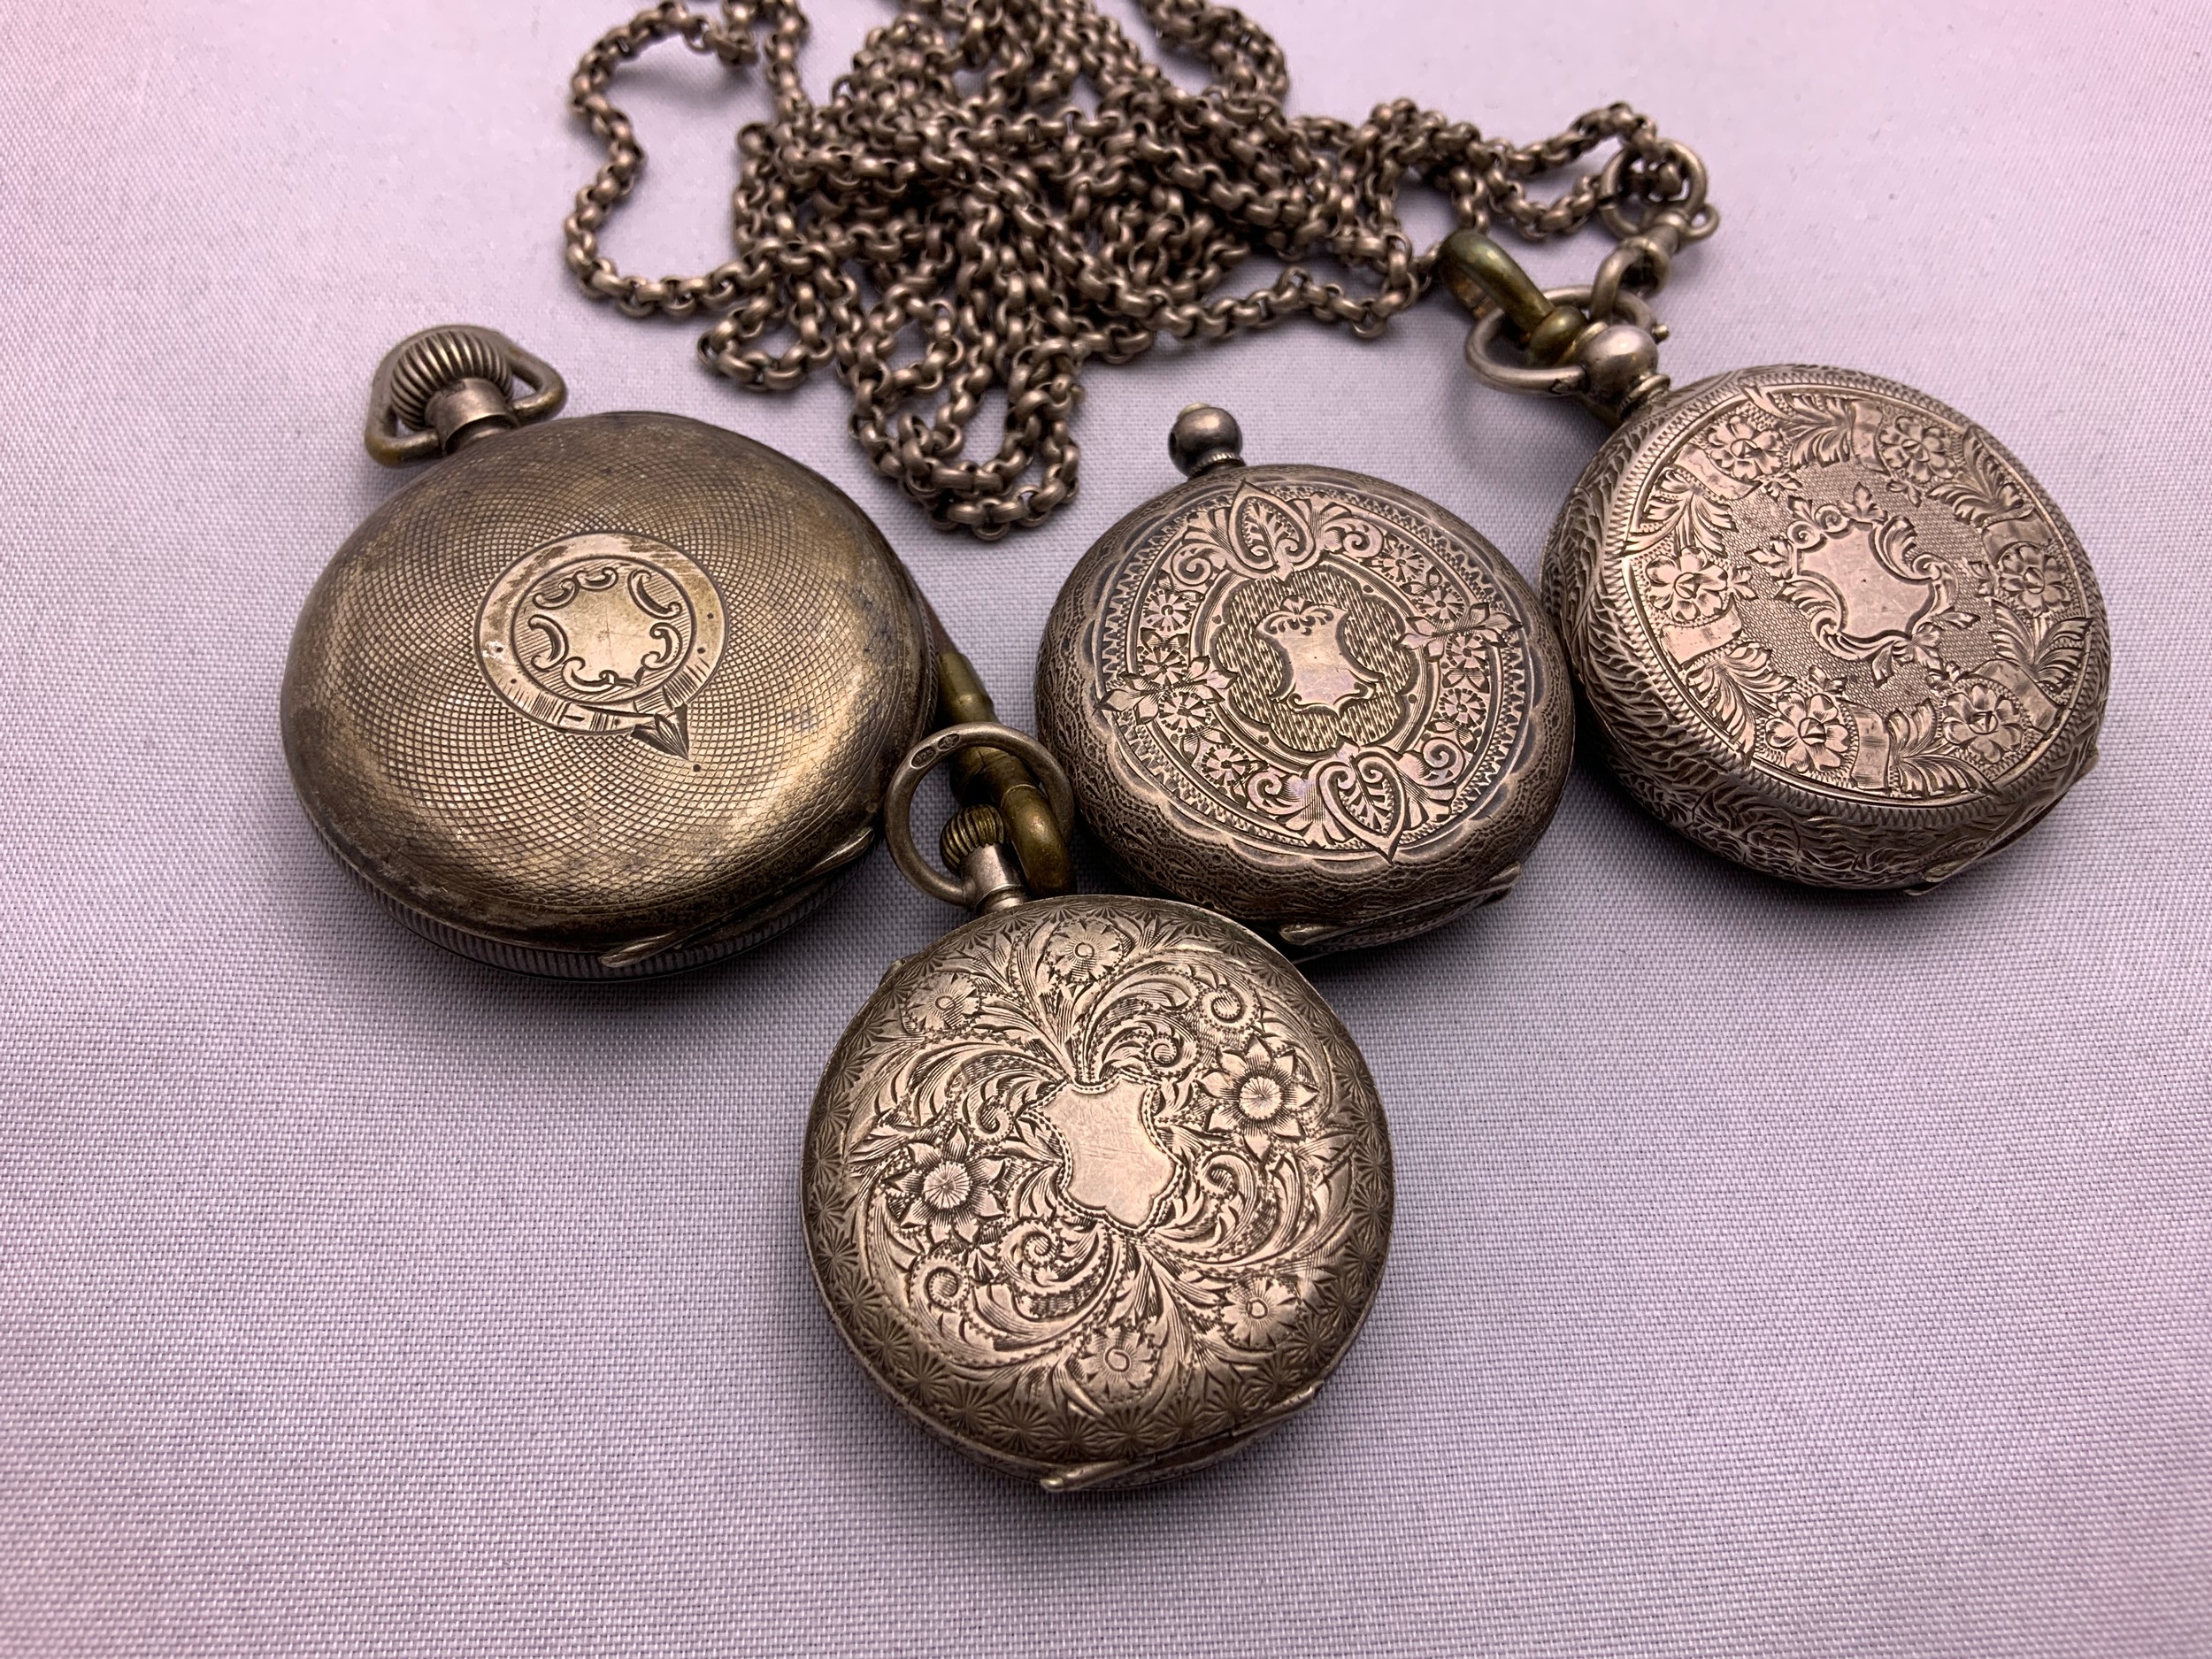 4x Silver Pocket Watches and Silver Chain - Image 2 of 3